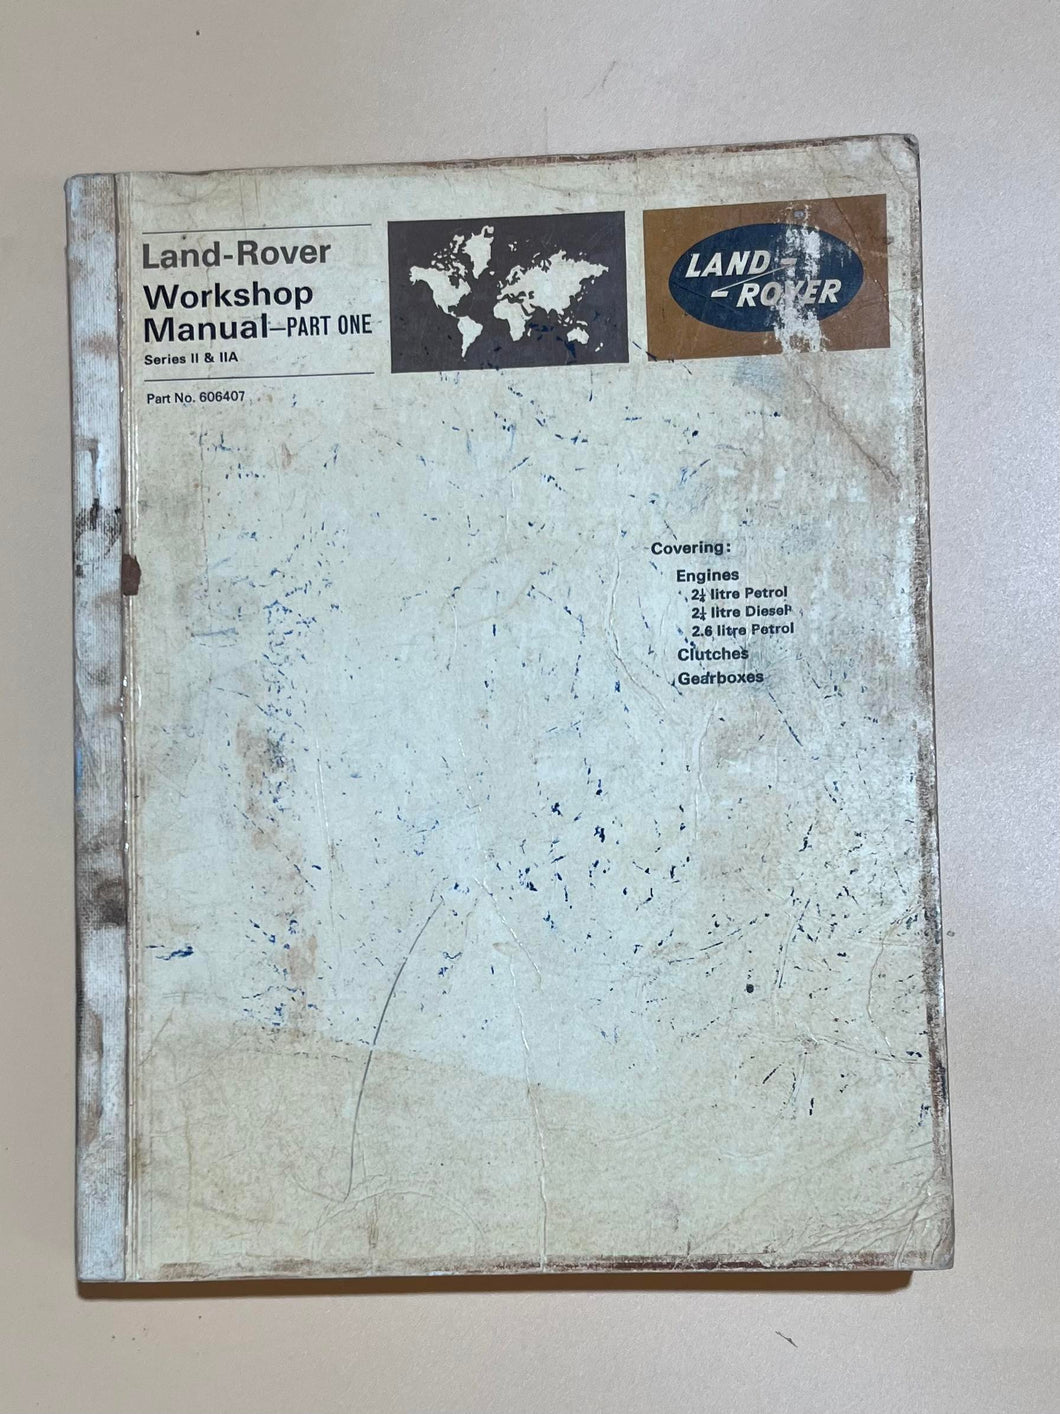 Land-Rover Workshop Manual - Part 1 and 2